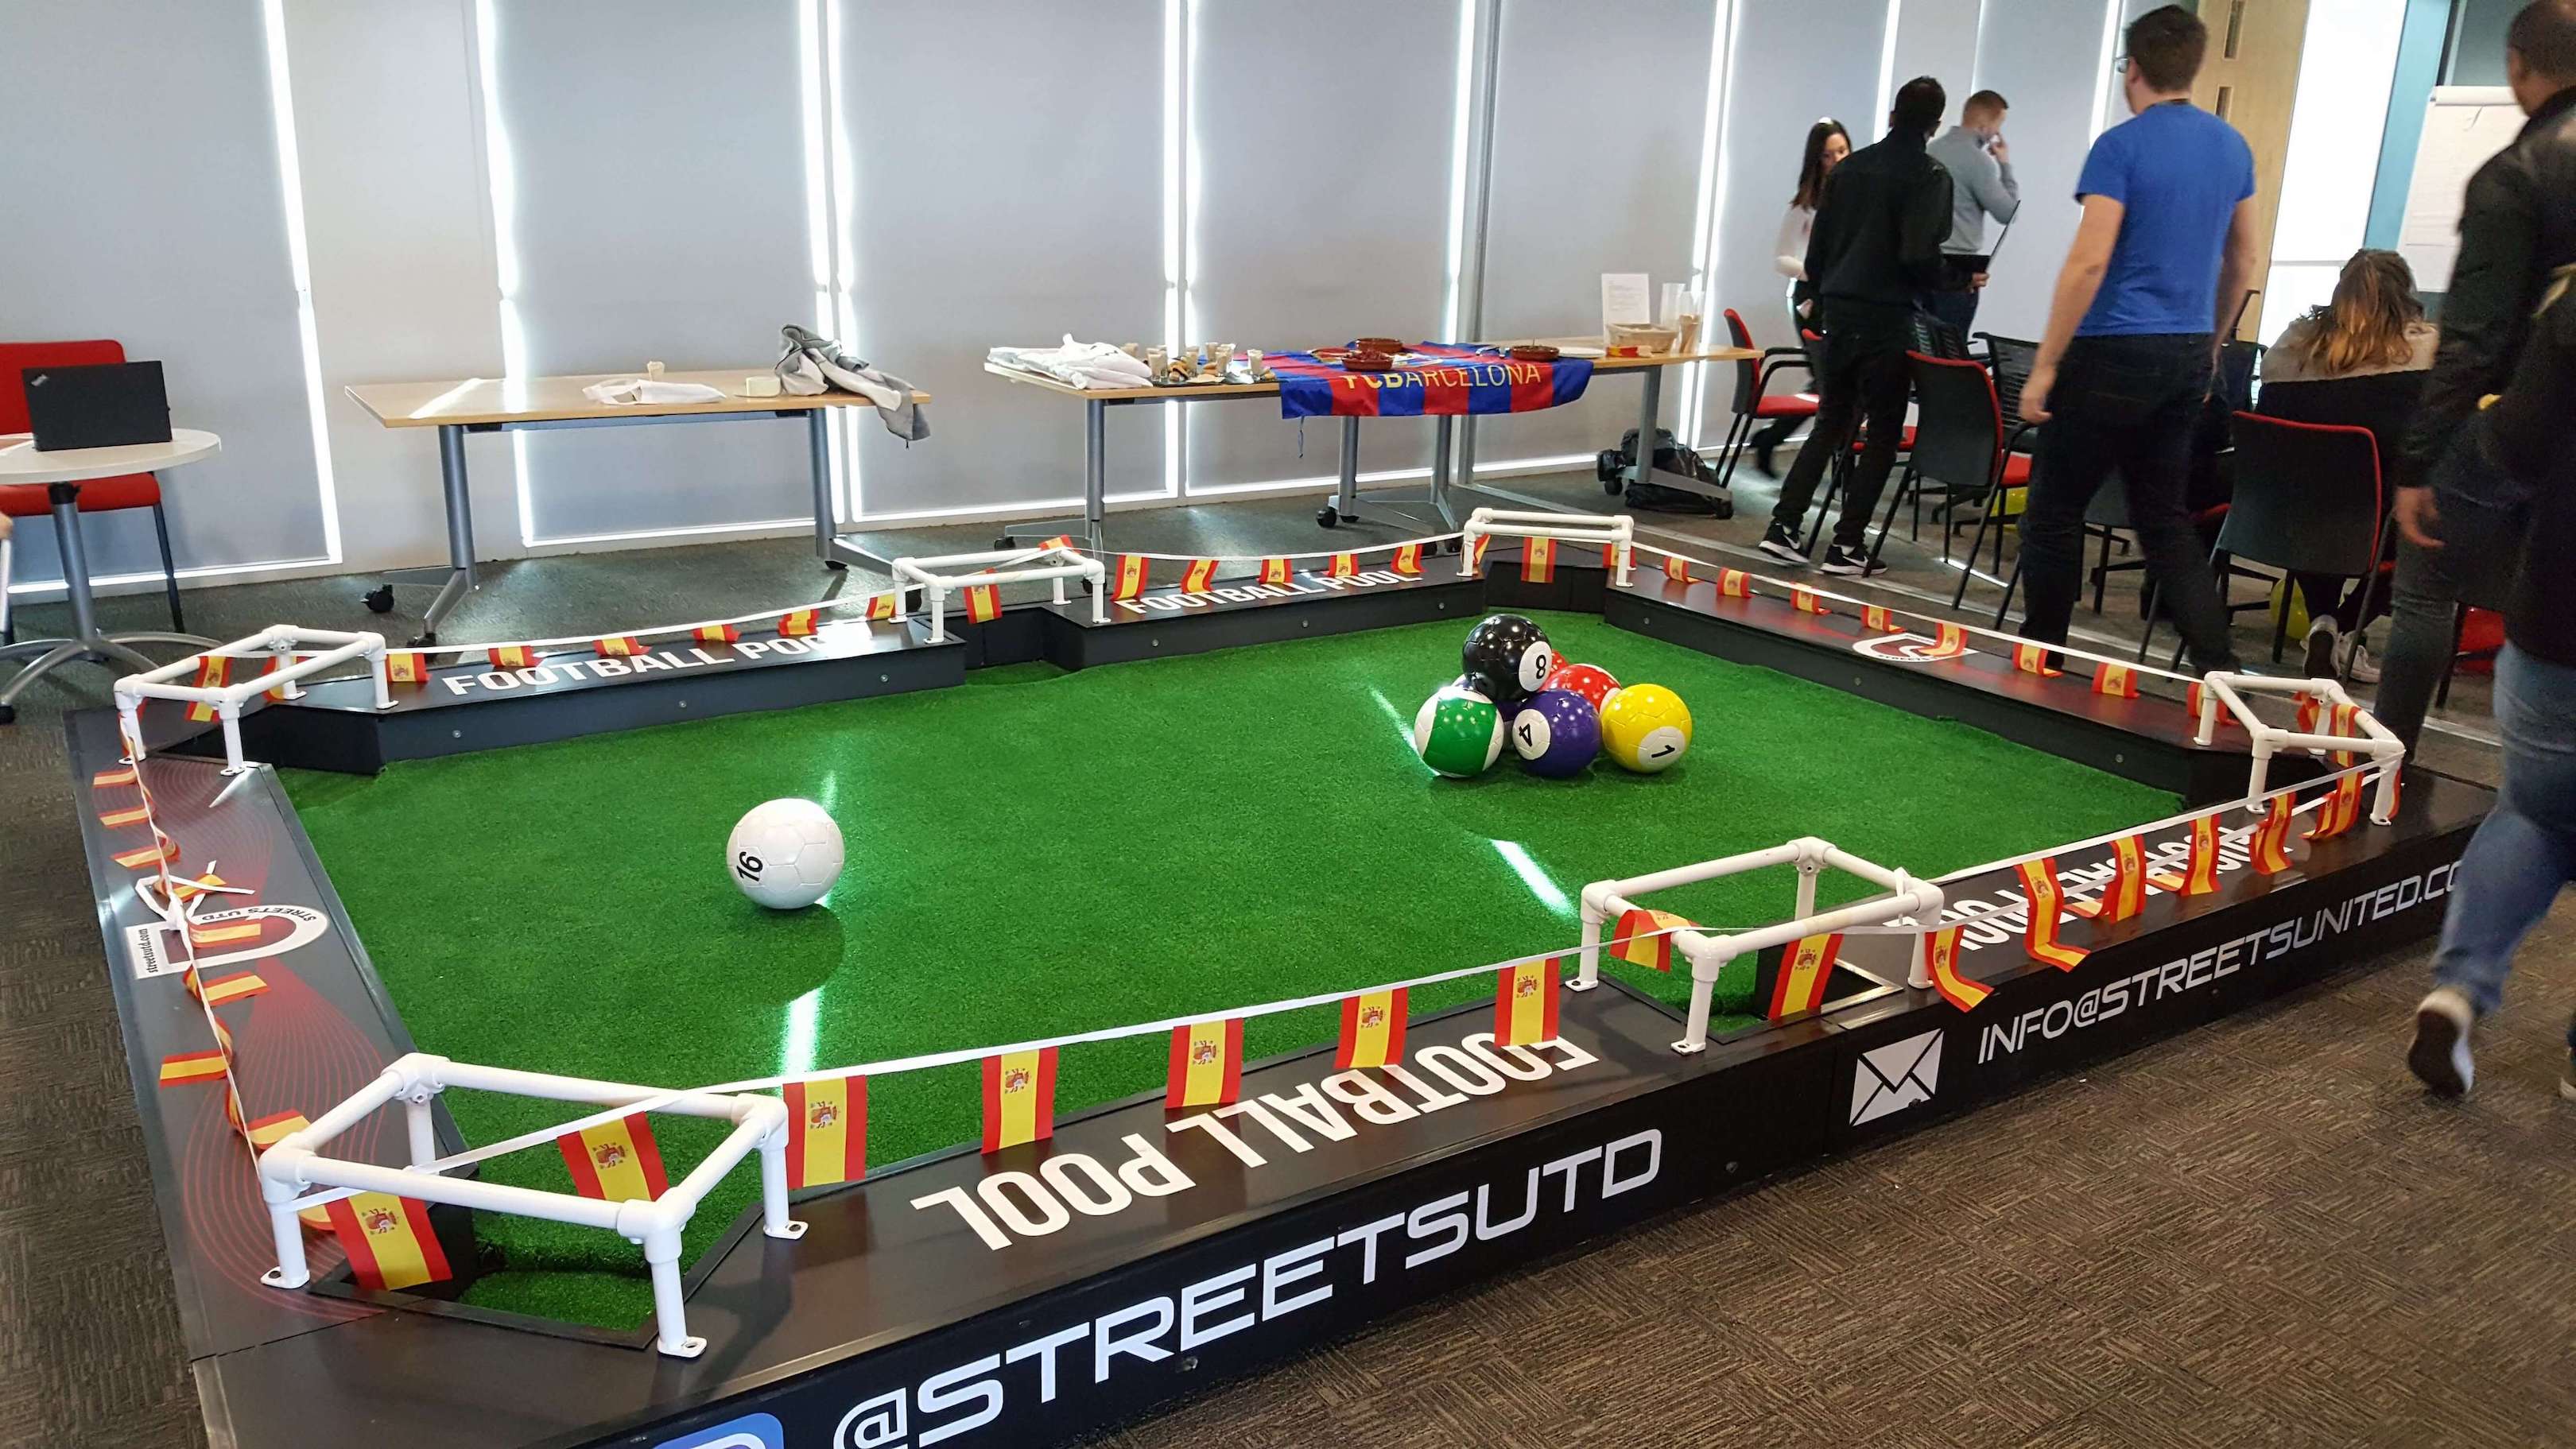 Hiring a football pool table for offices in London